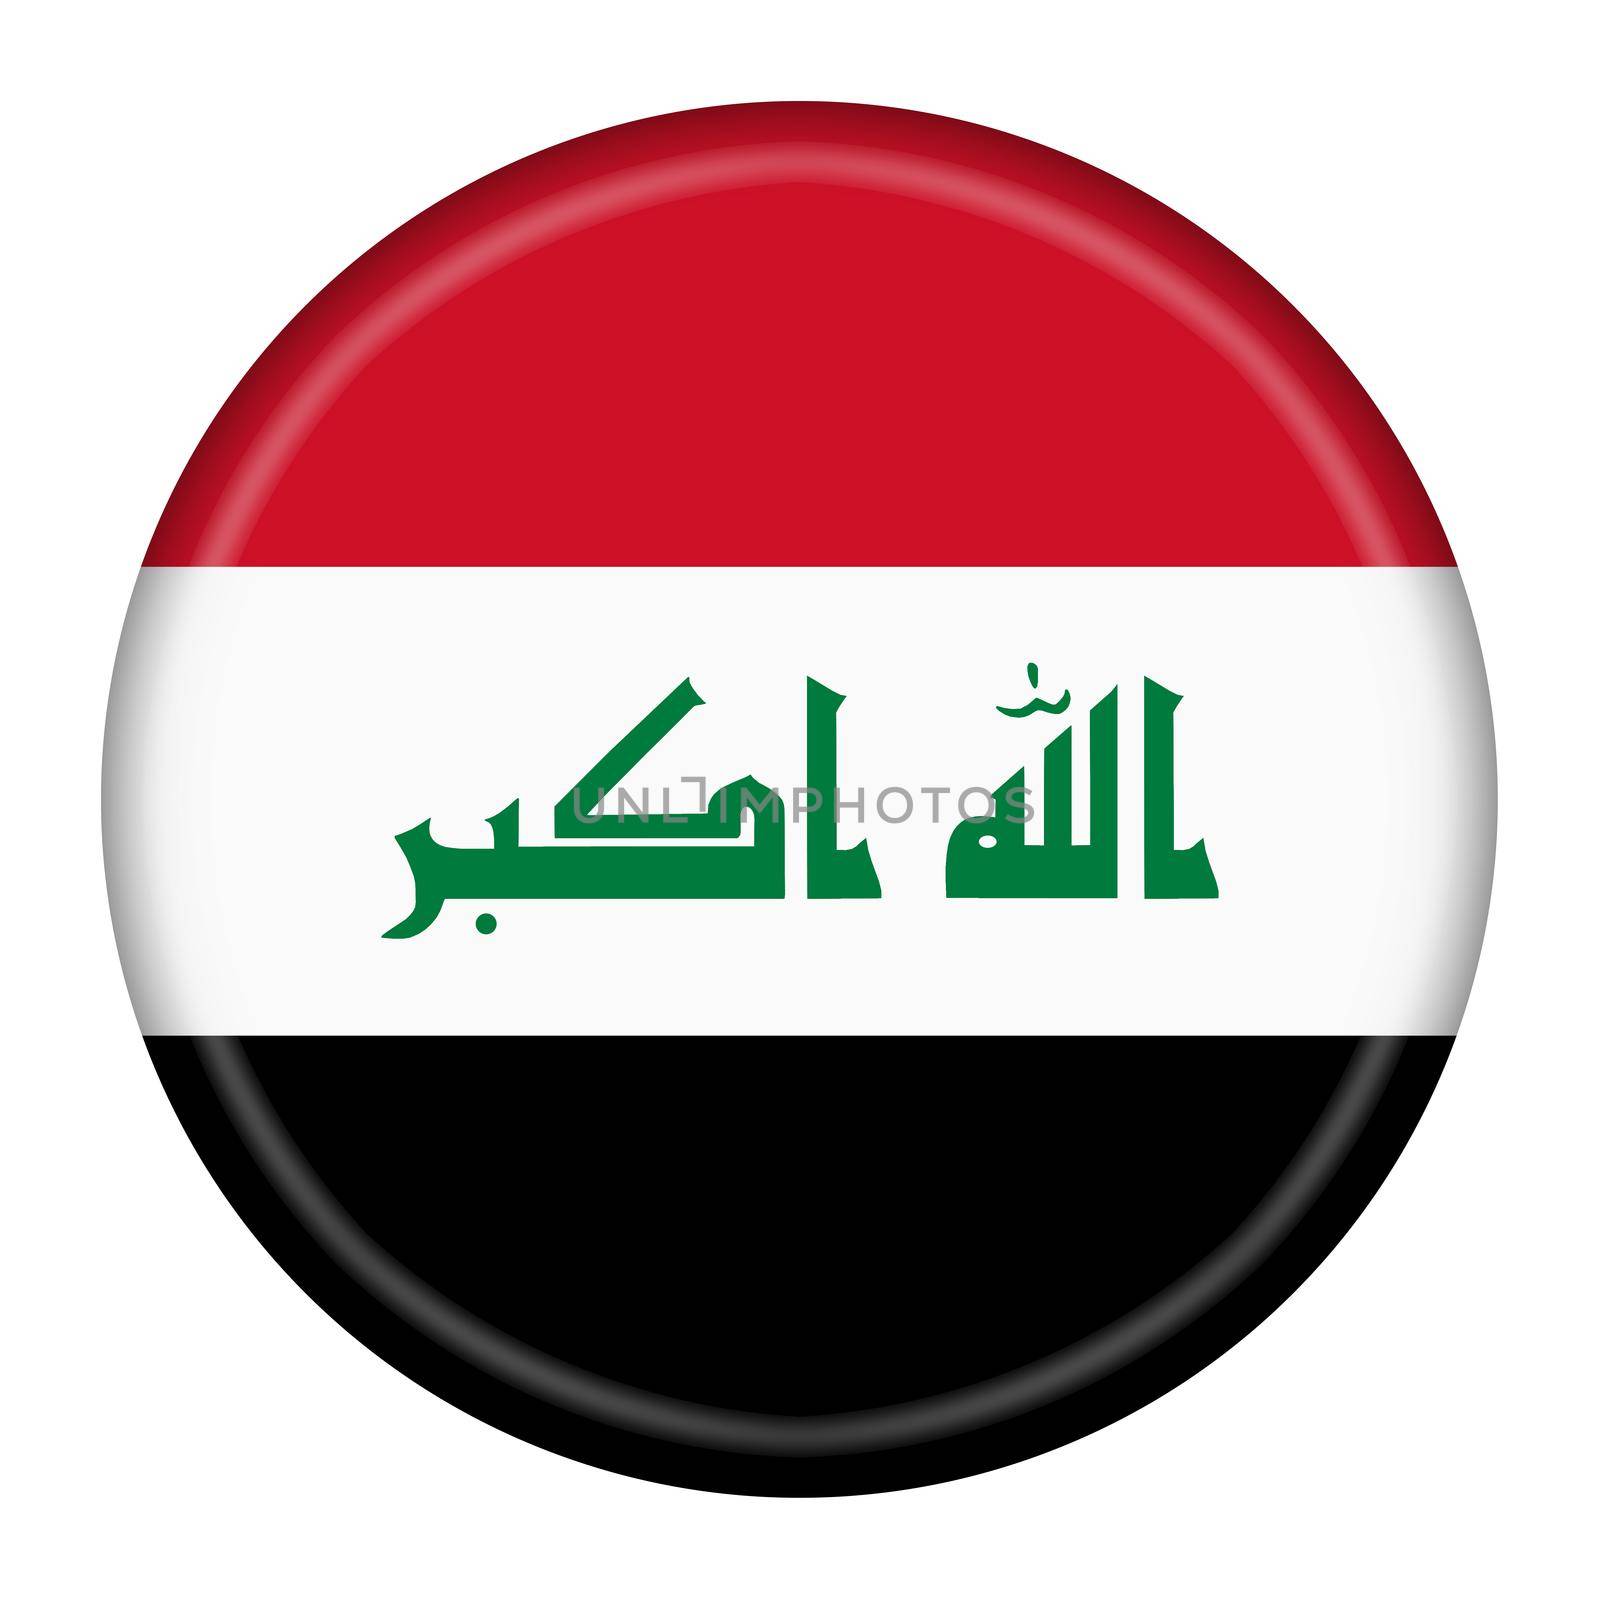 An Iraq flag button 3d illustration with clipping path red white black green takbir